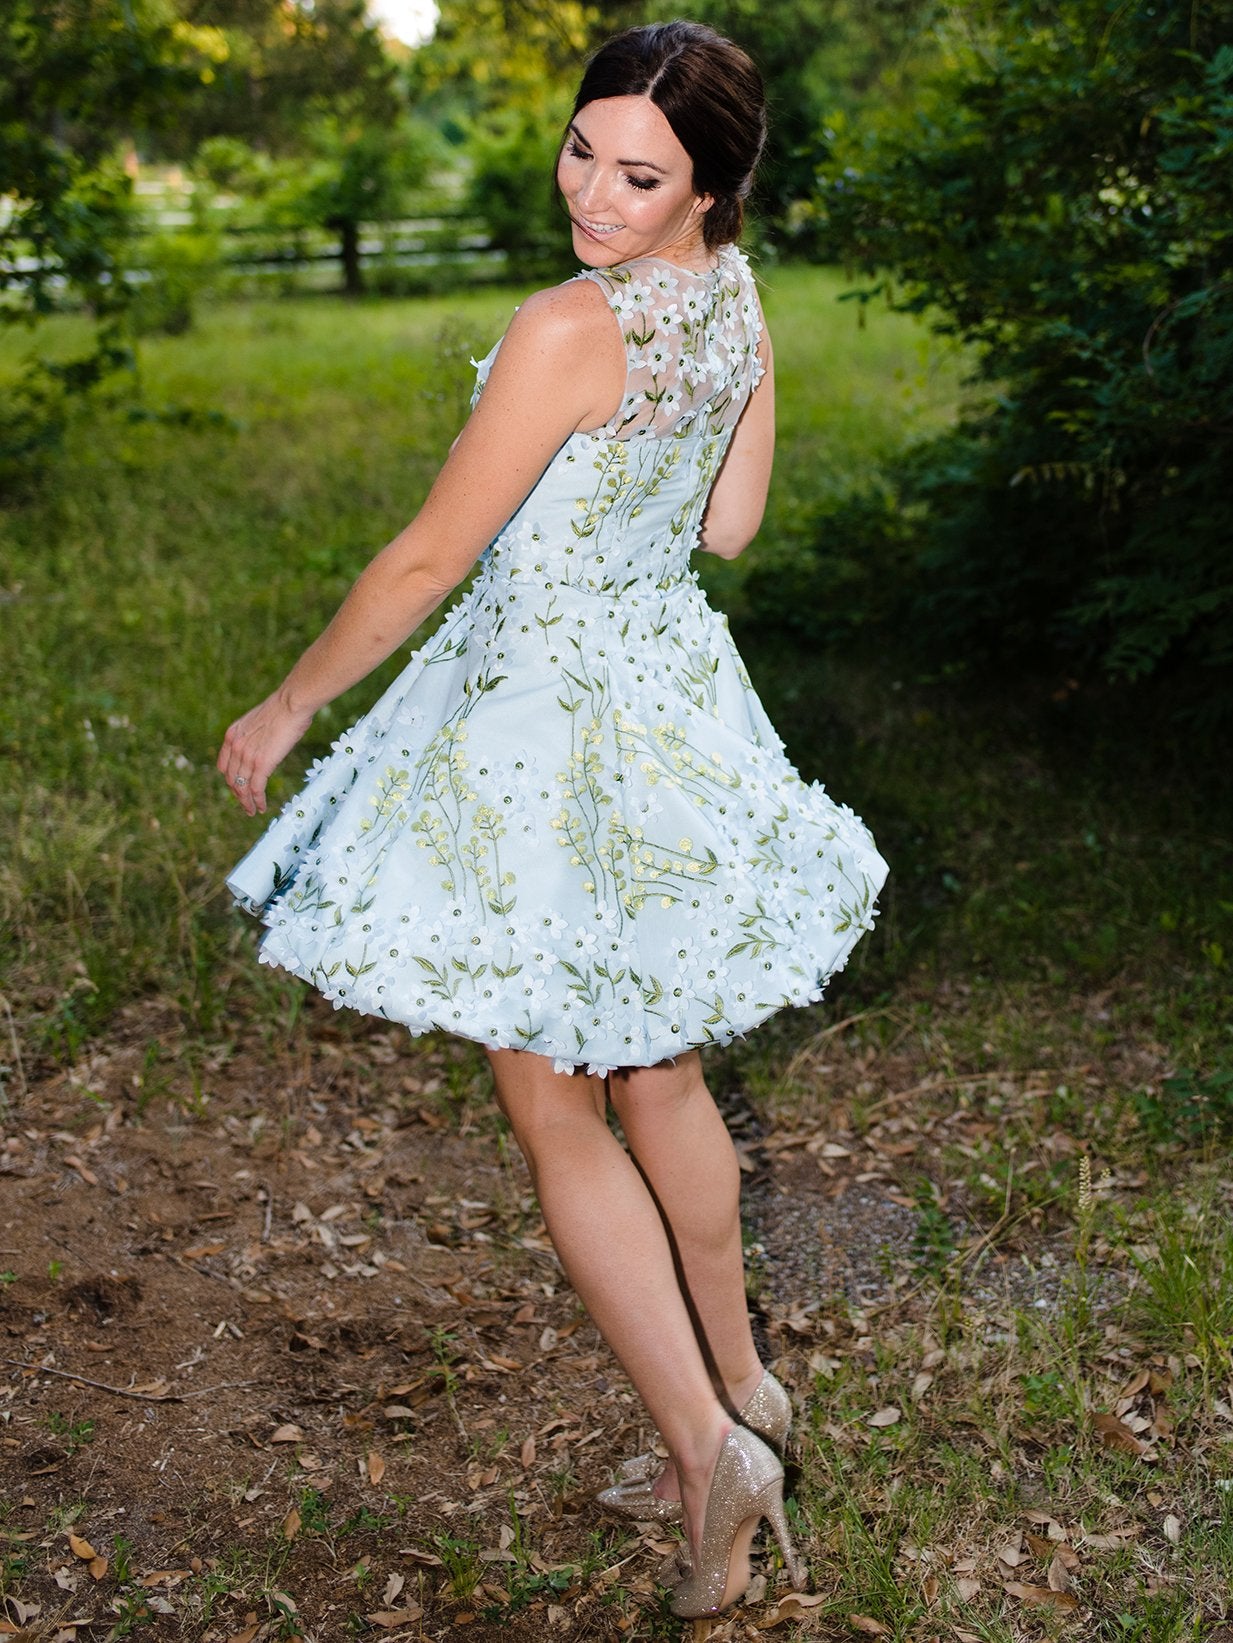 Lilies of the Field - They Bloom Dress Pic 8